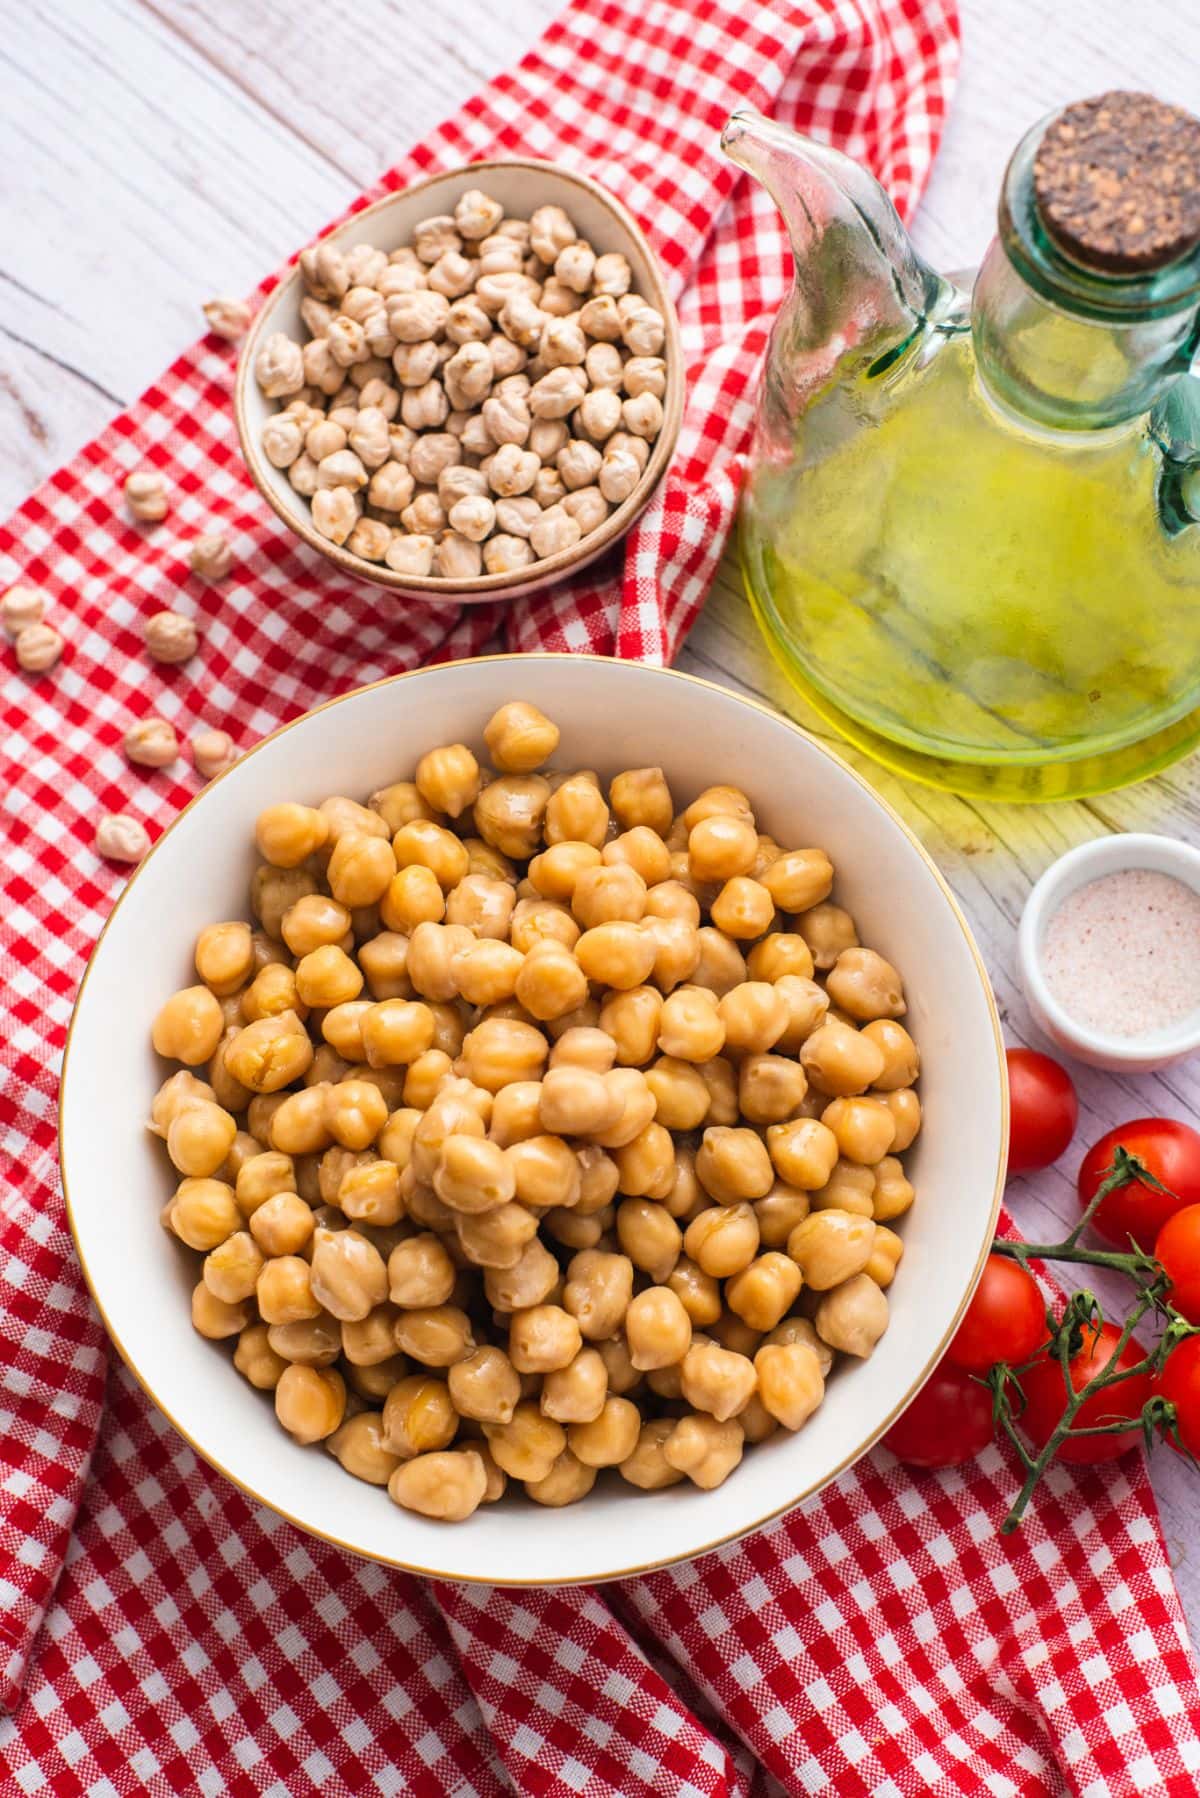 How to cook chickpeas 4